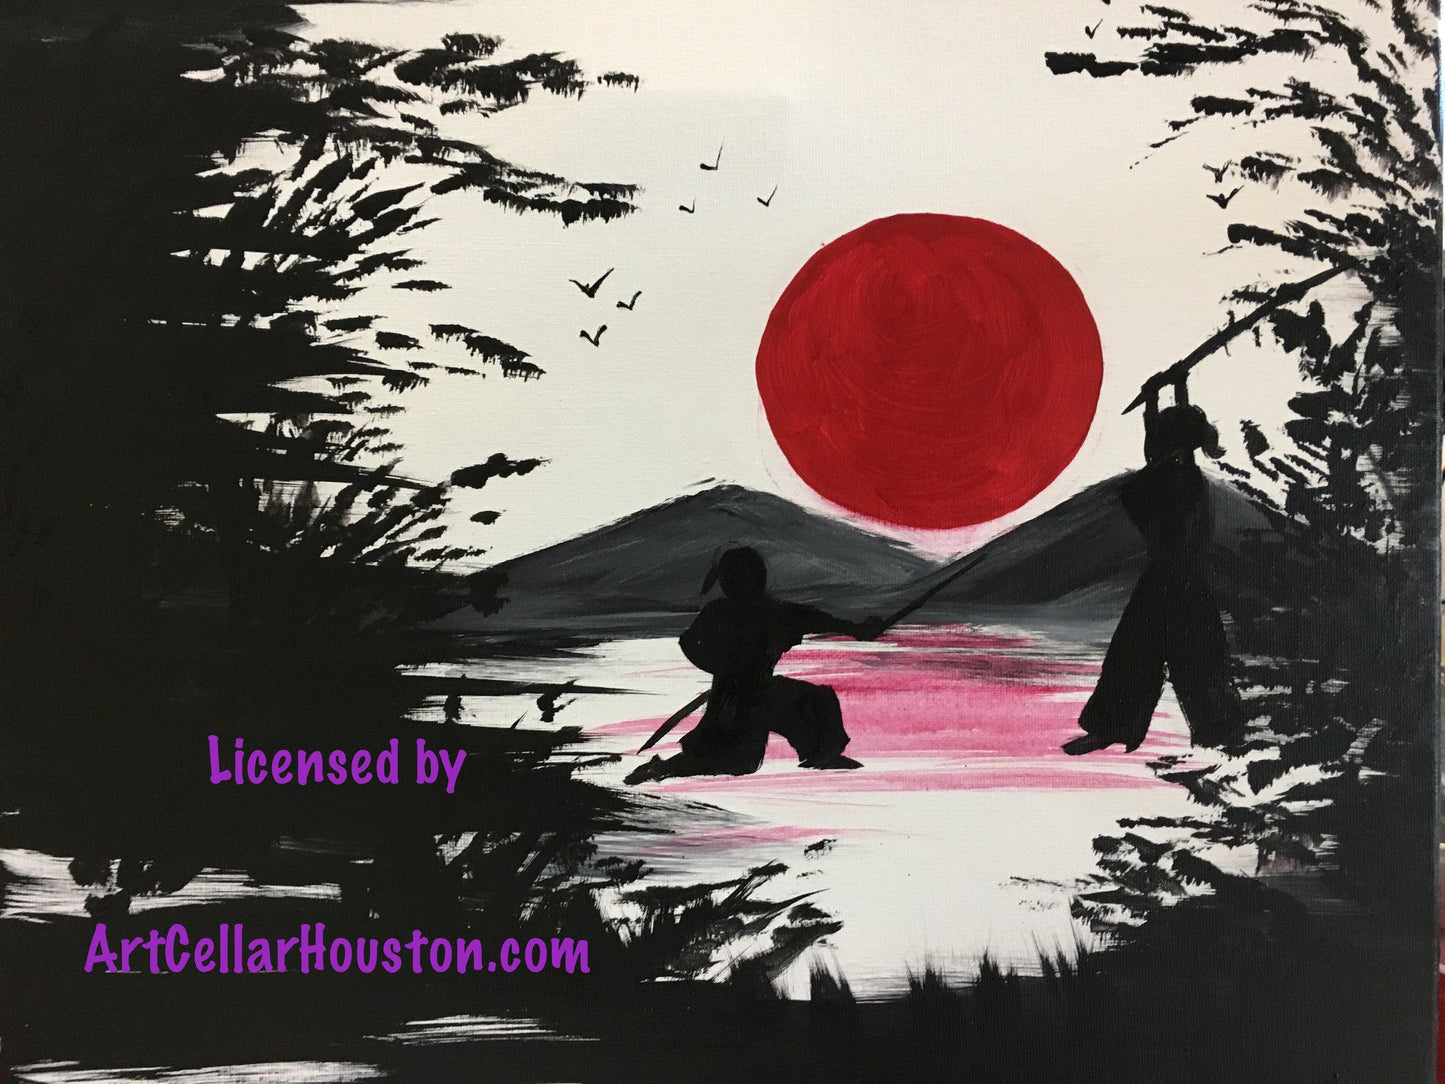 Wed, Apr 12th, 4-6P “Under the Red Moon” Public Houston Kids Pastel Class